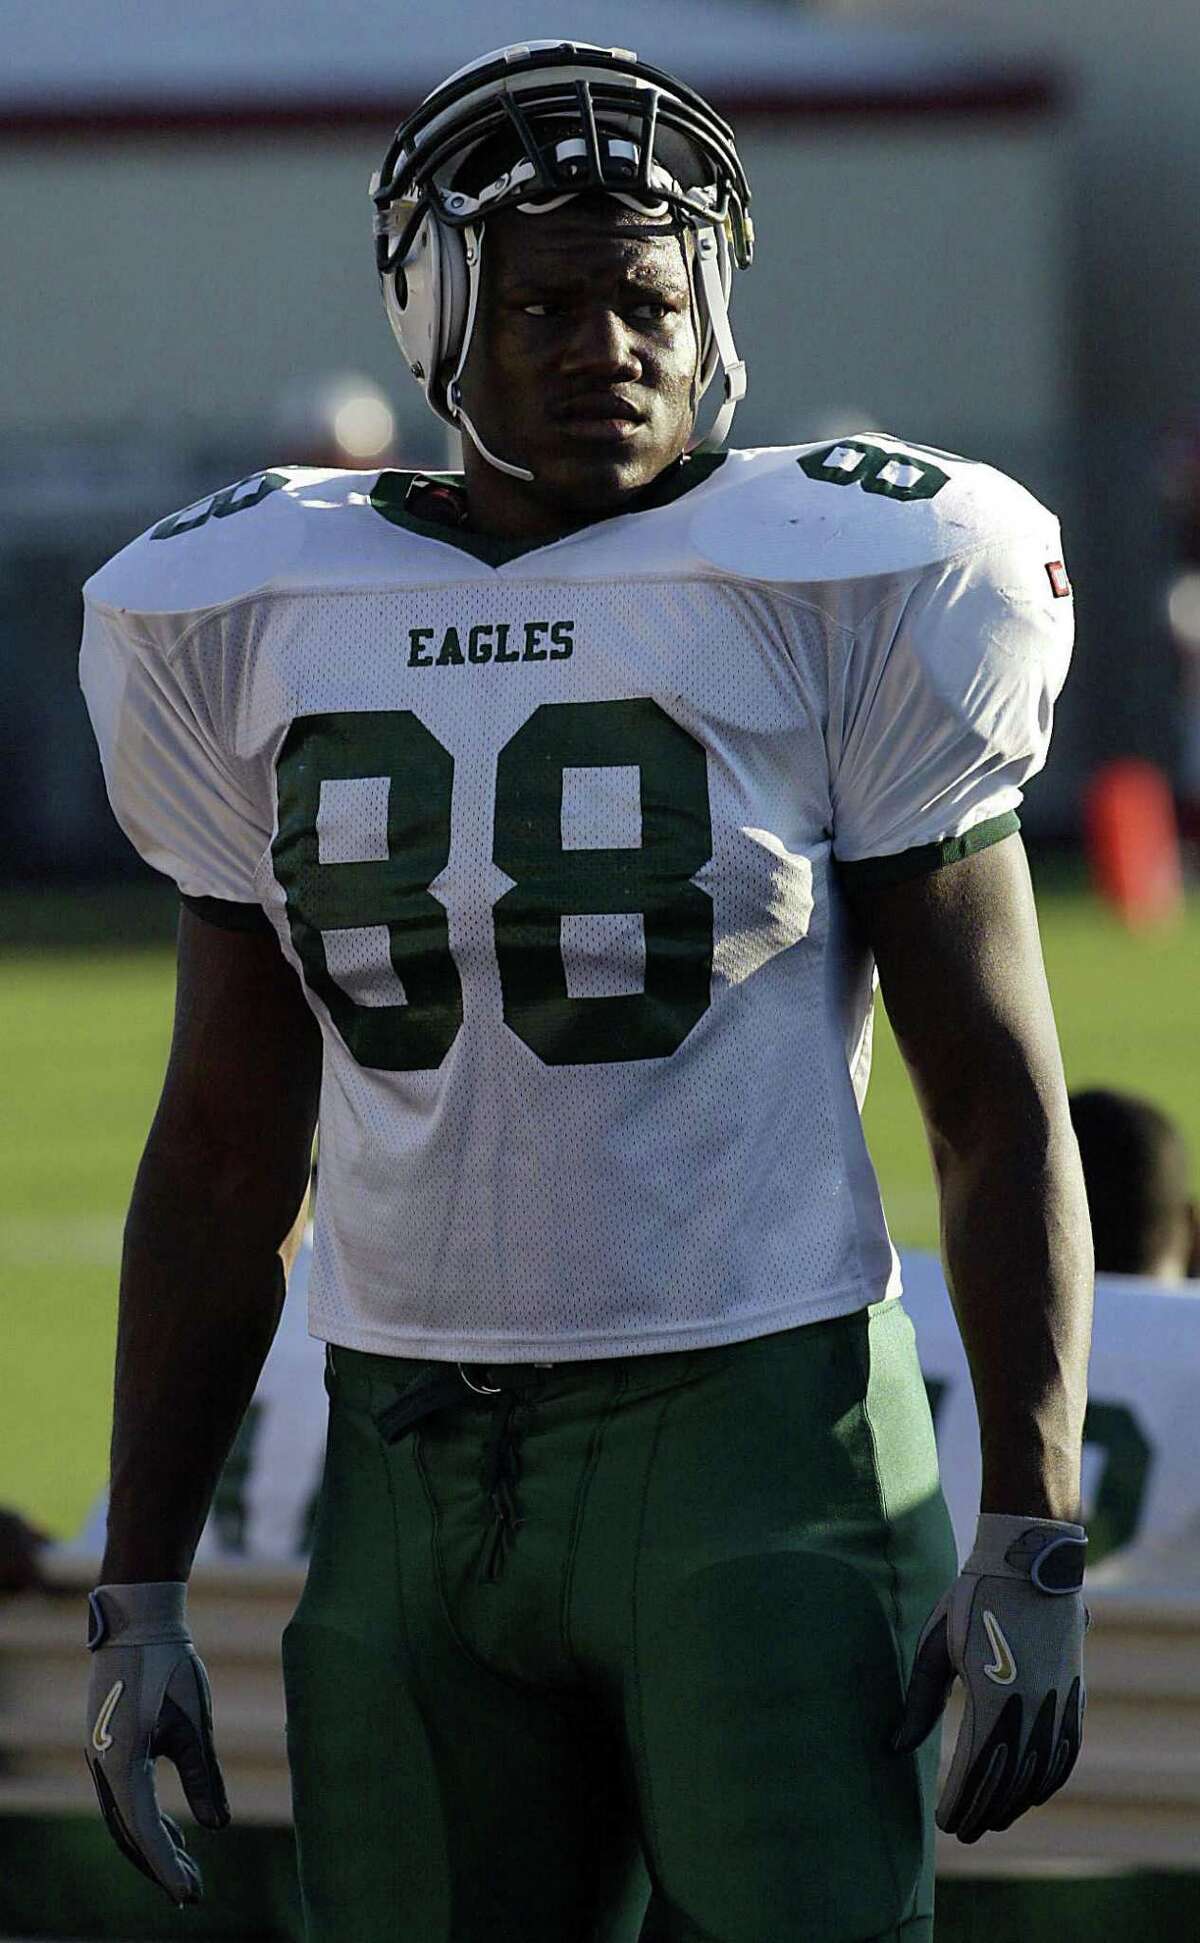 Klein Forest's McCollins Umeh before Friday's high school football game at Tomball high school's Cougar Stadium in Tomball, Texas September 12,2003. James Nielsen (Special to the Chronicle)